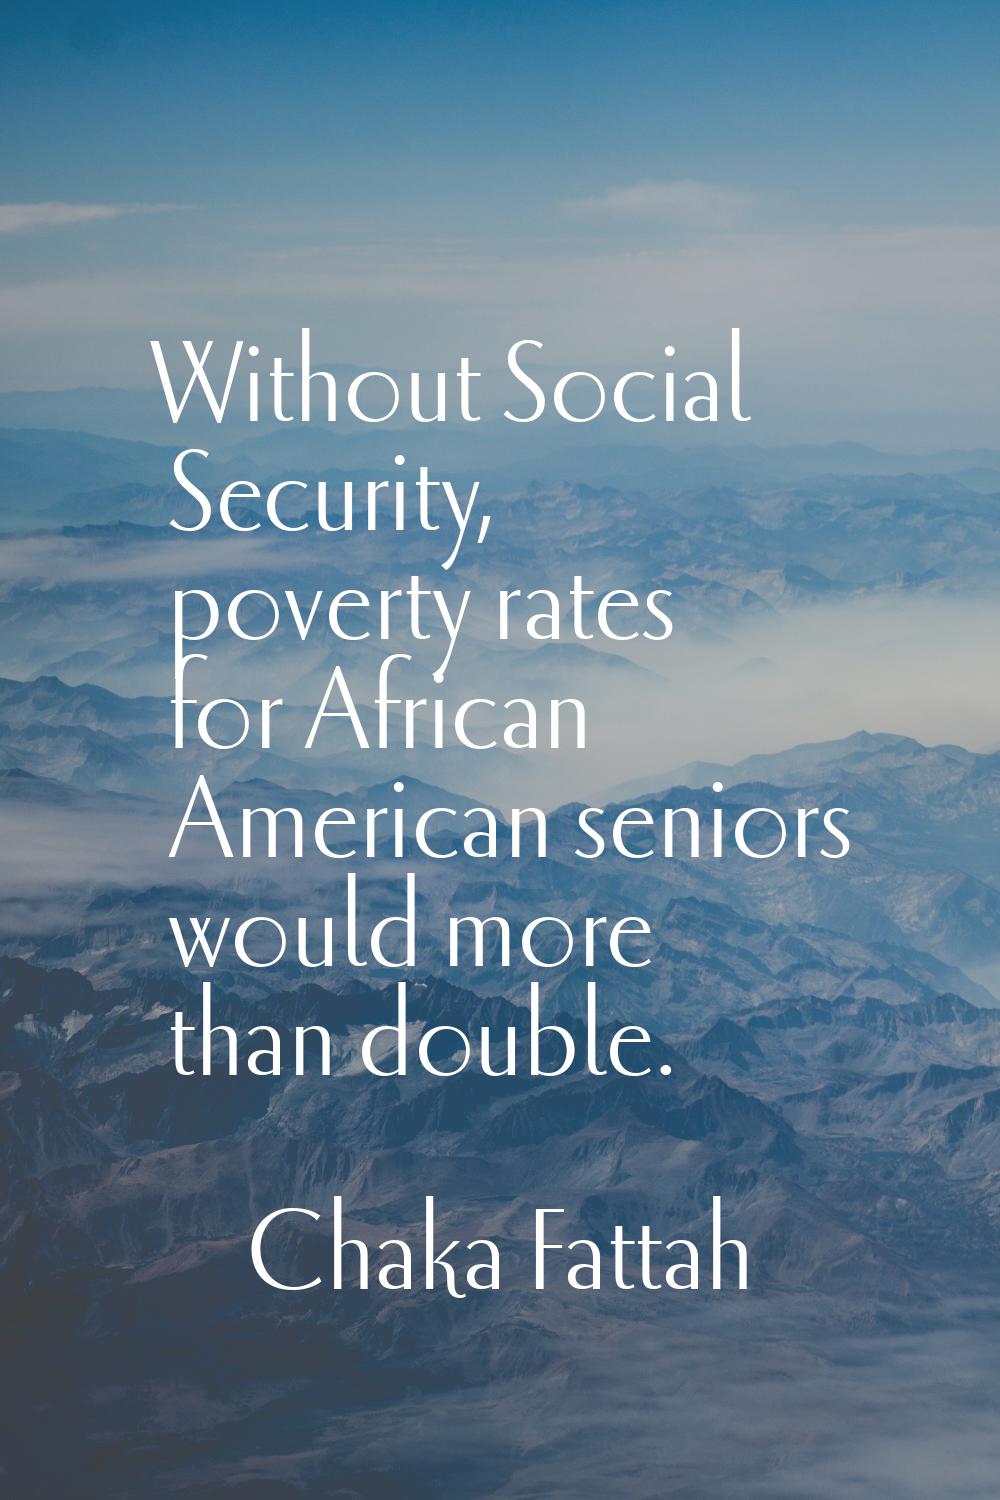 Without Social Security, poverty rates for African American seniors would more than double.